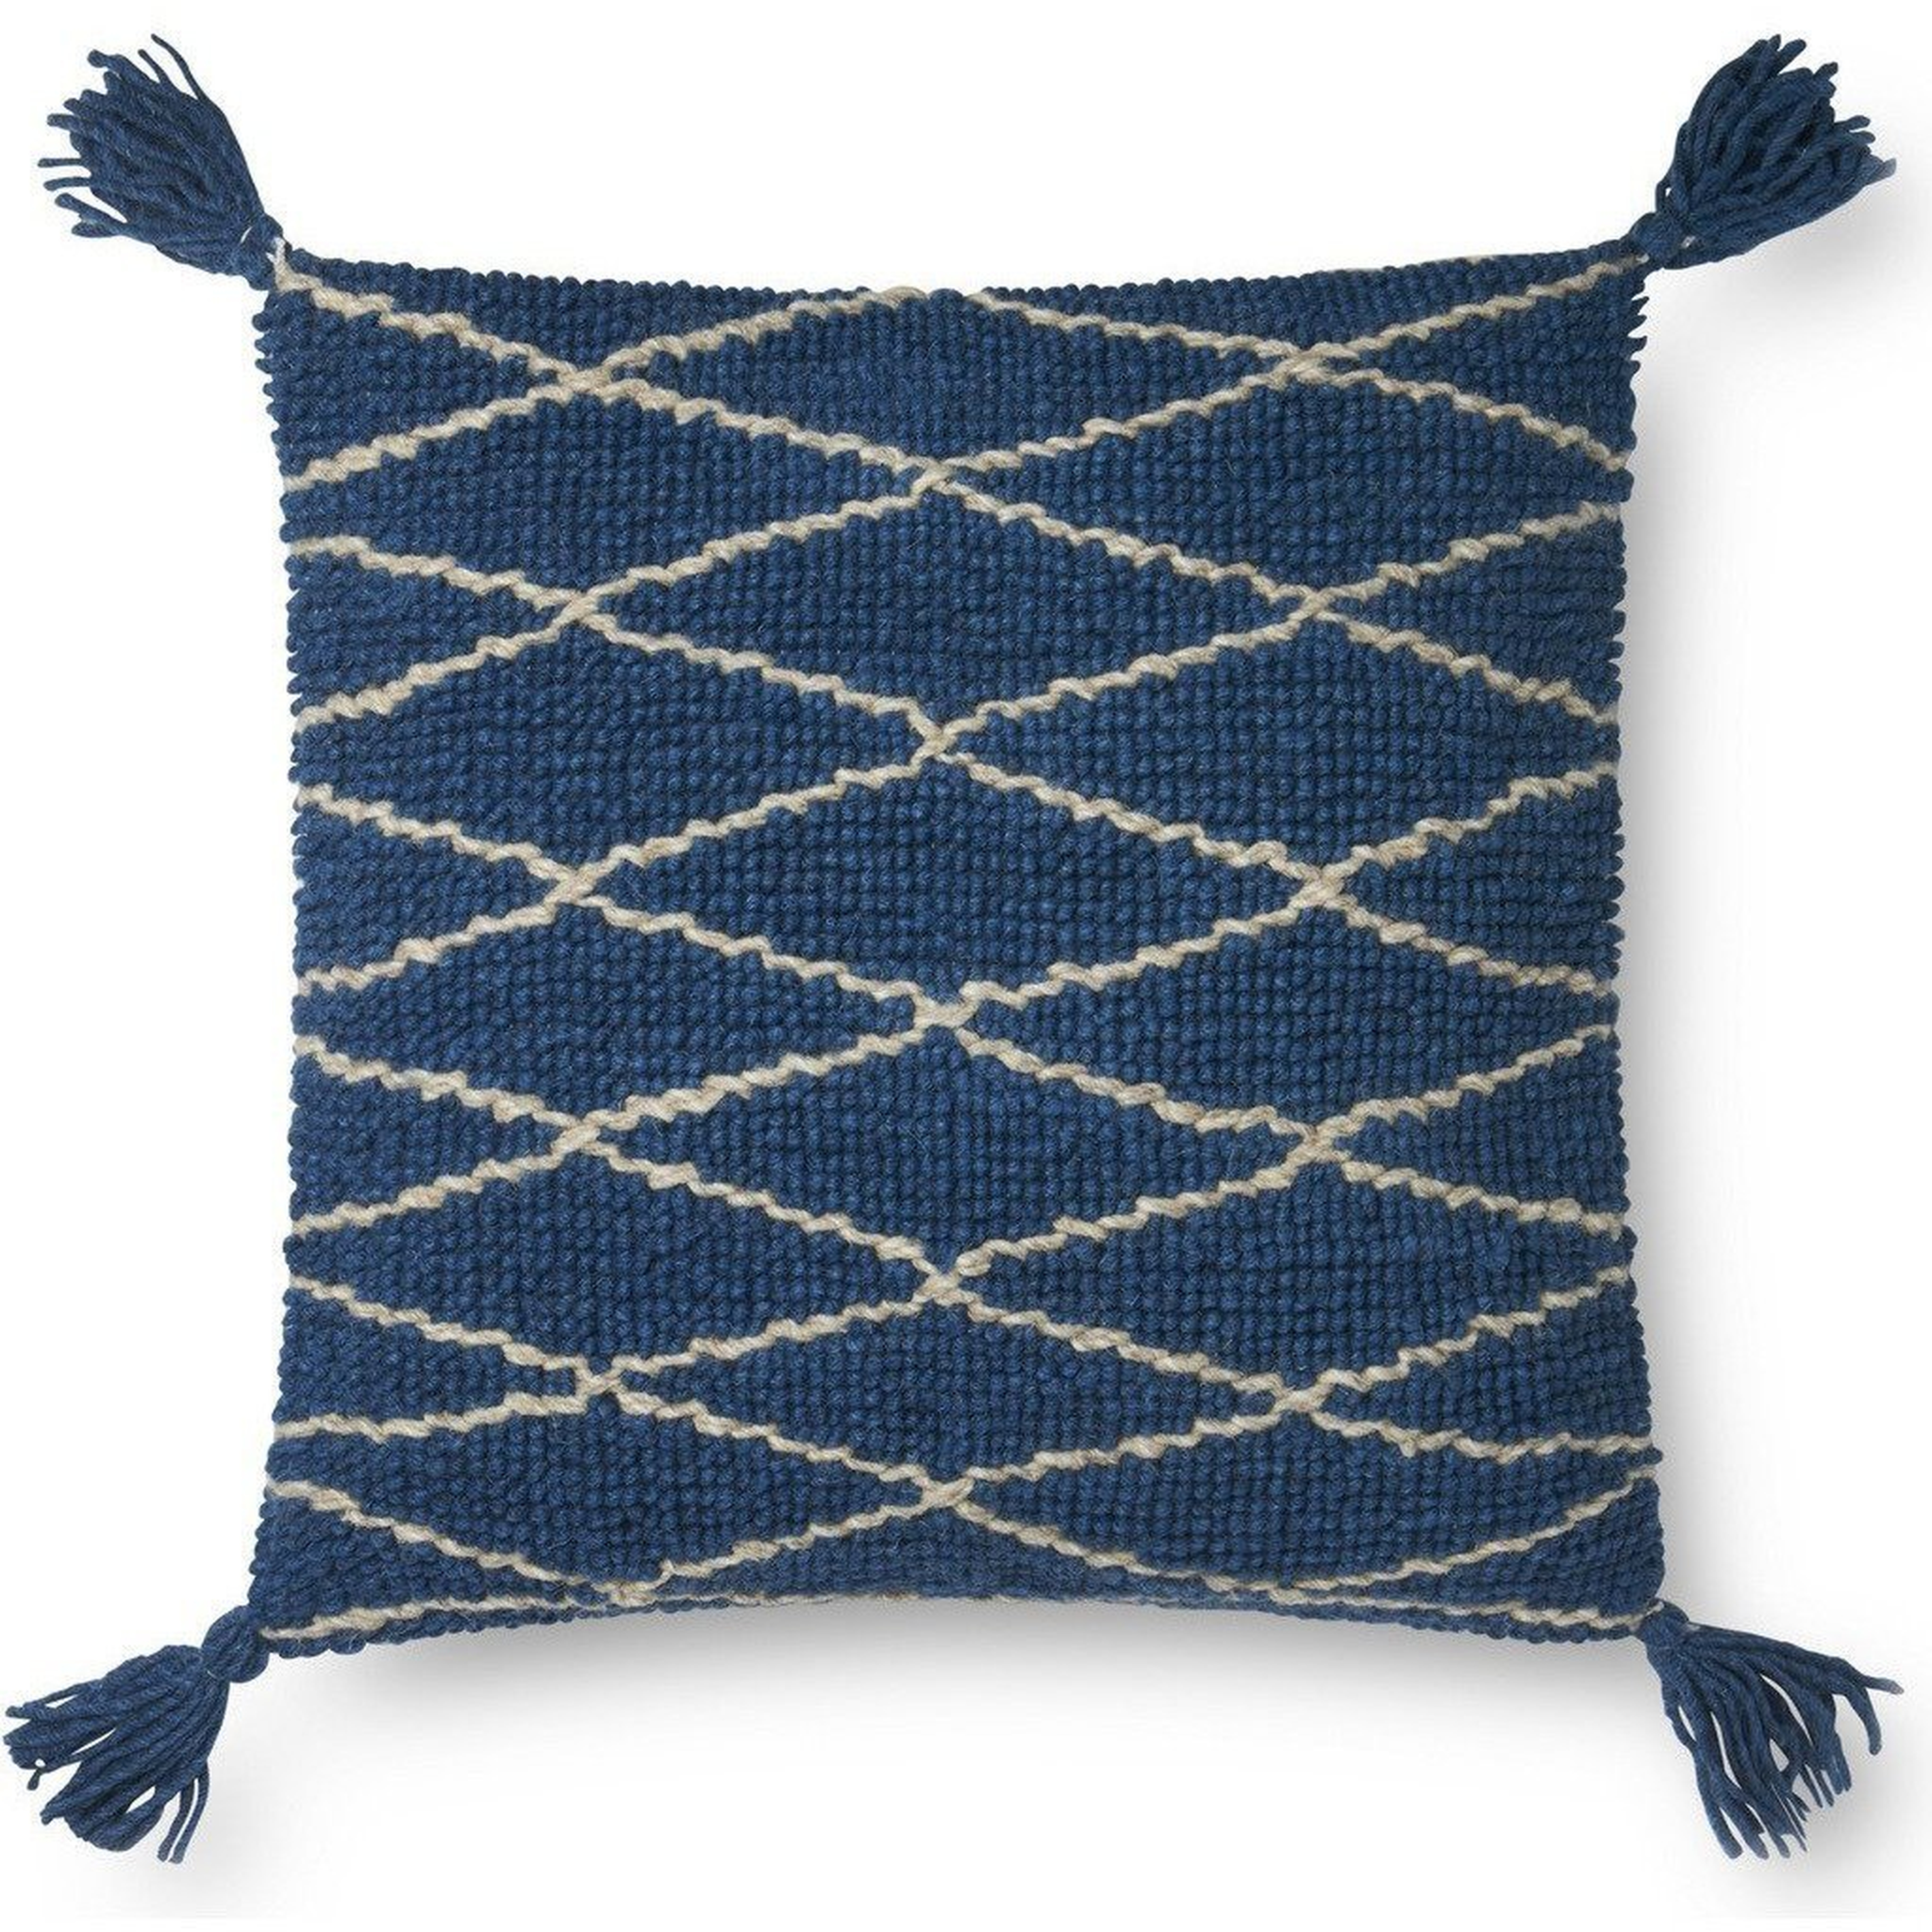 Cris-Cros Throw Pillow Cover with Tassels, 22" x 22", Blue - Loloi Rugs